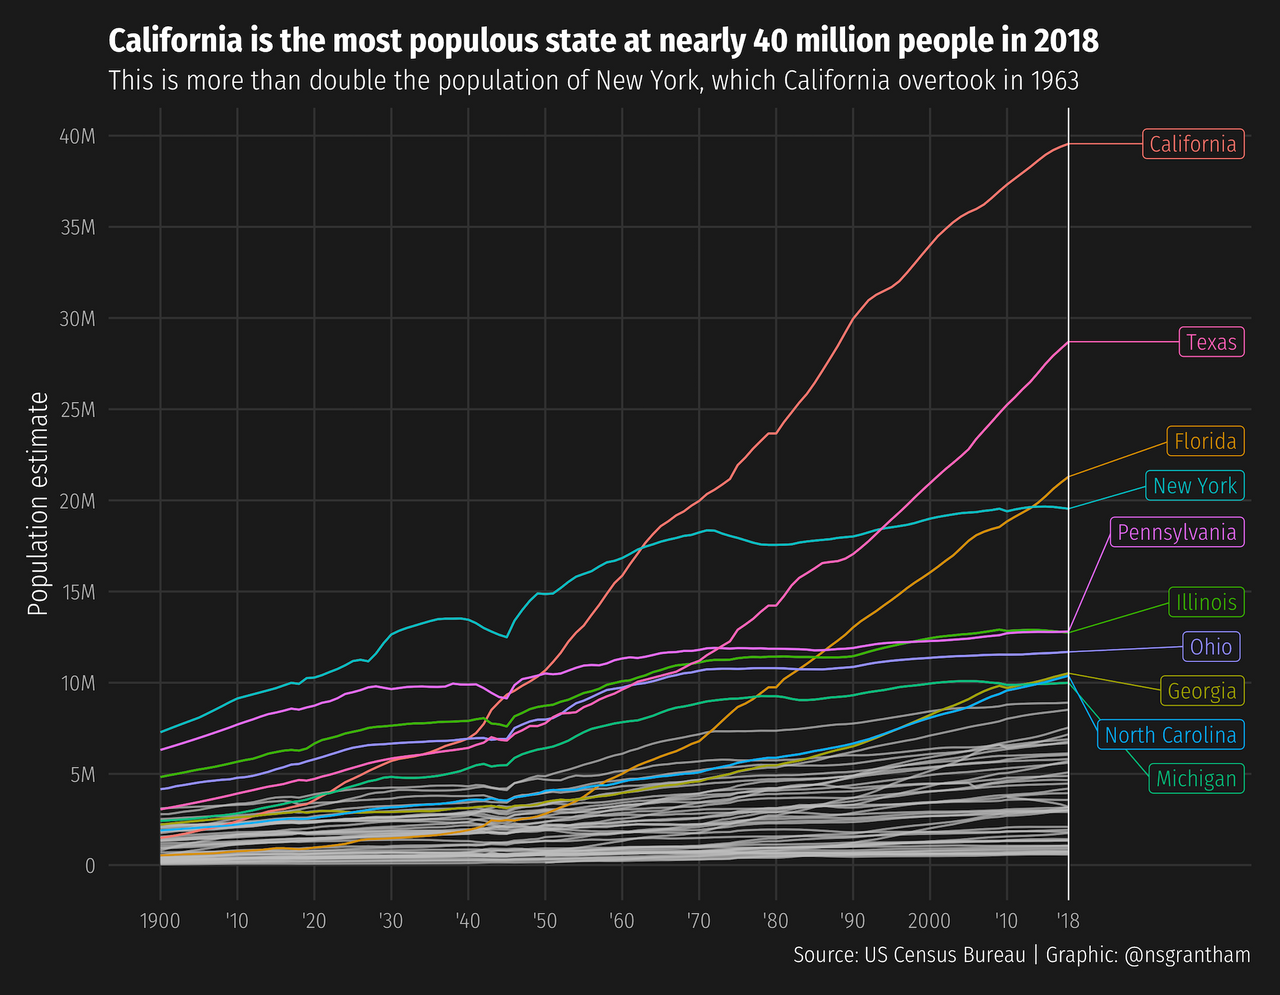 California is the most populous state followed by Texas, Florida, and New York